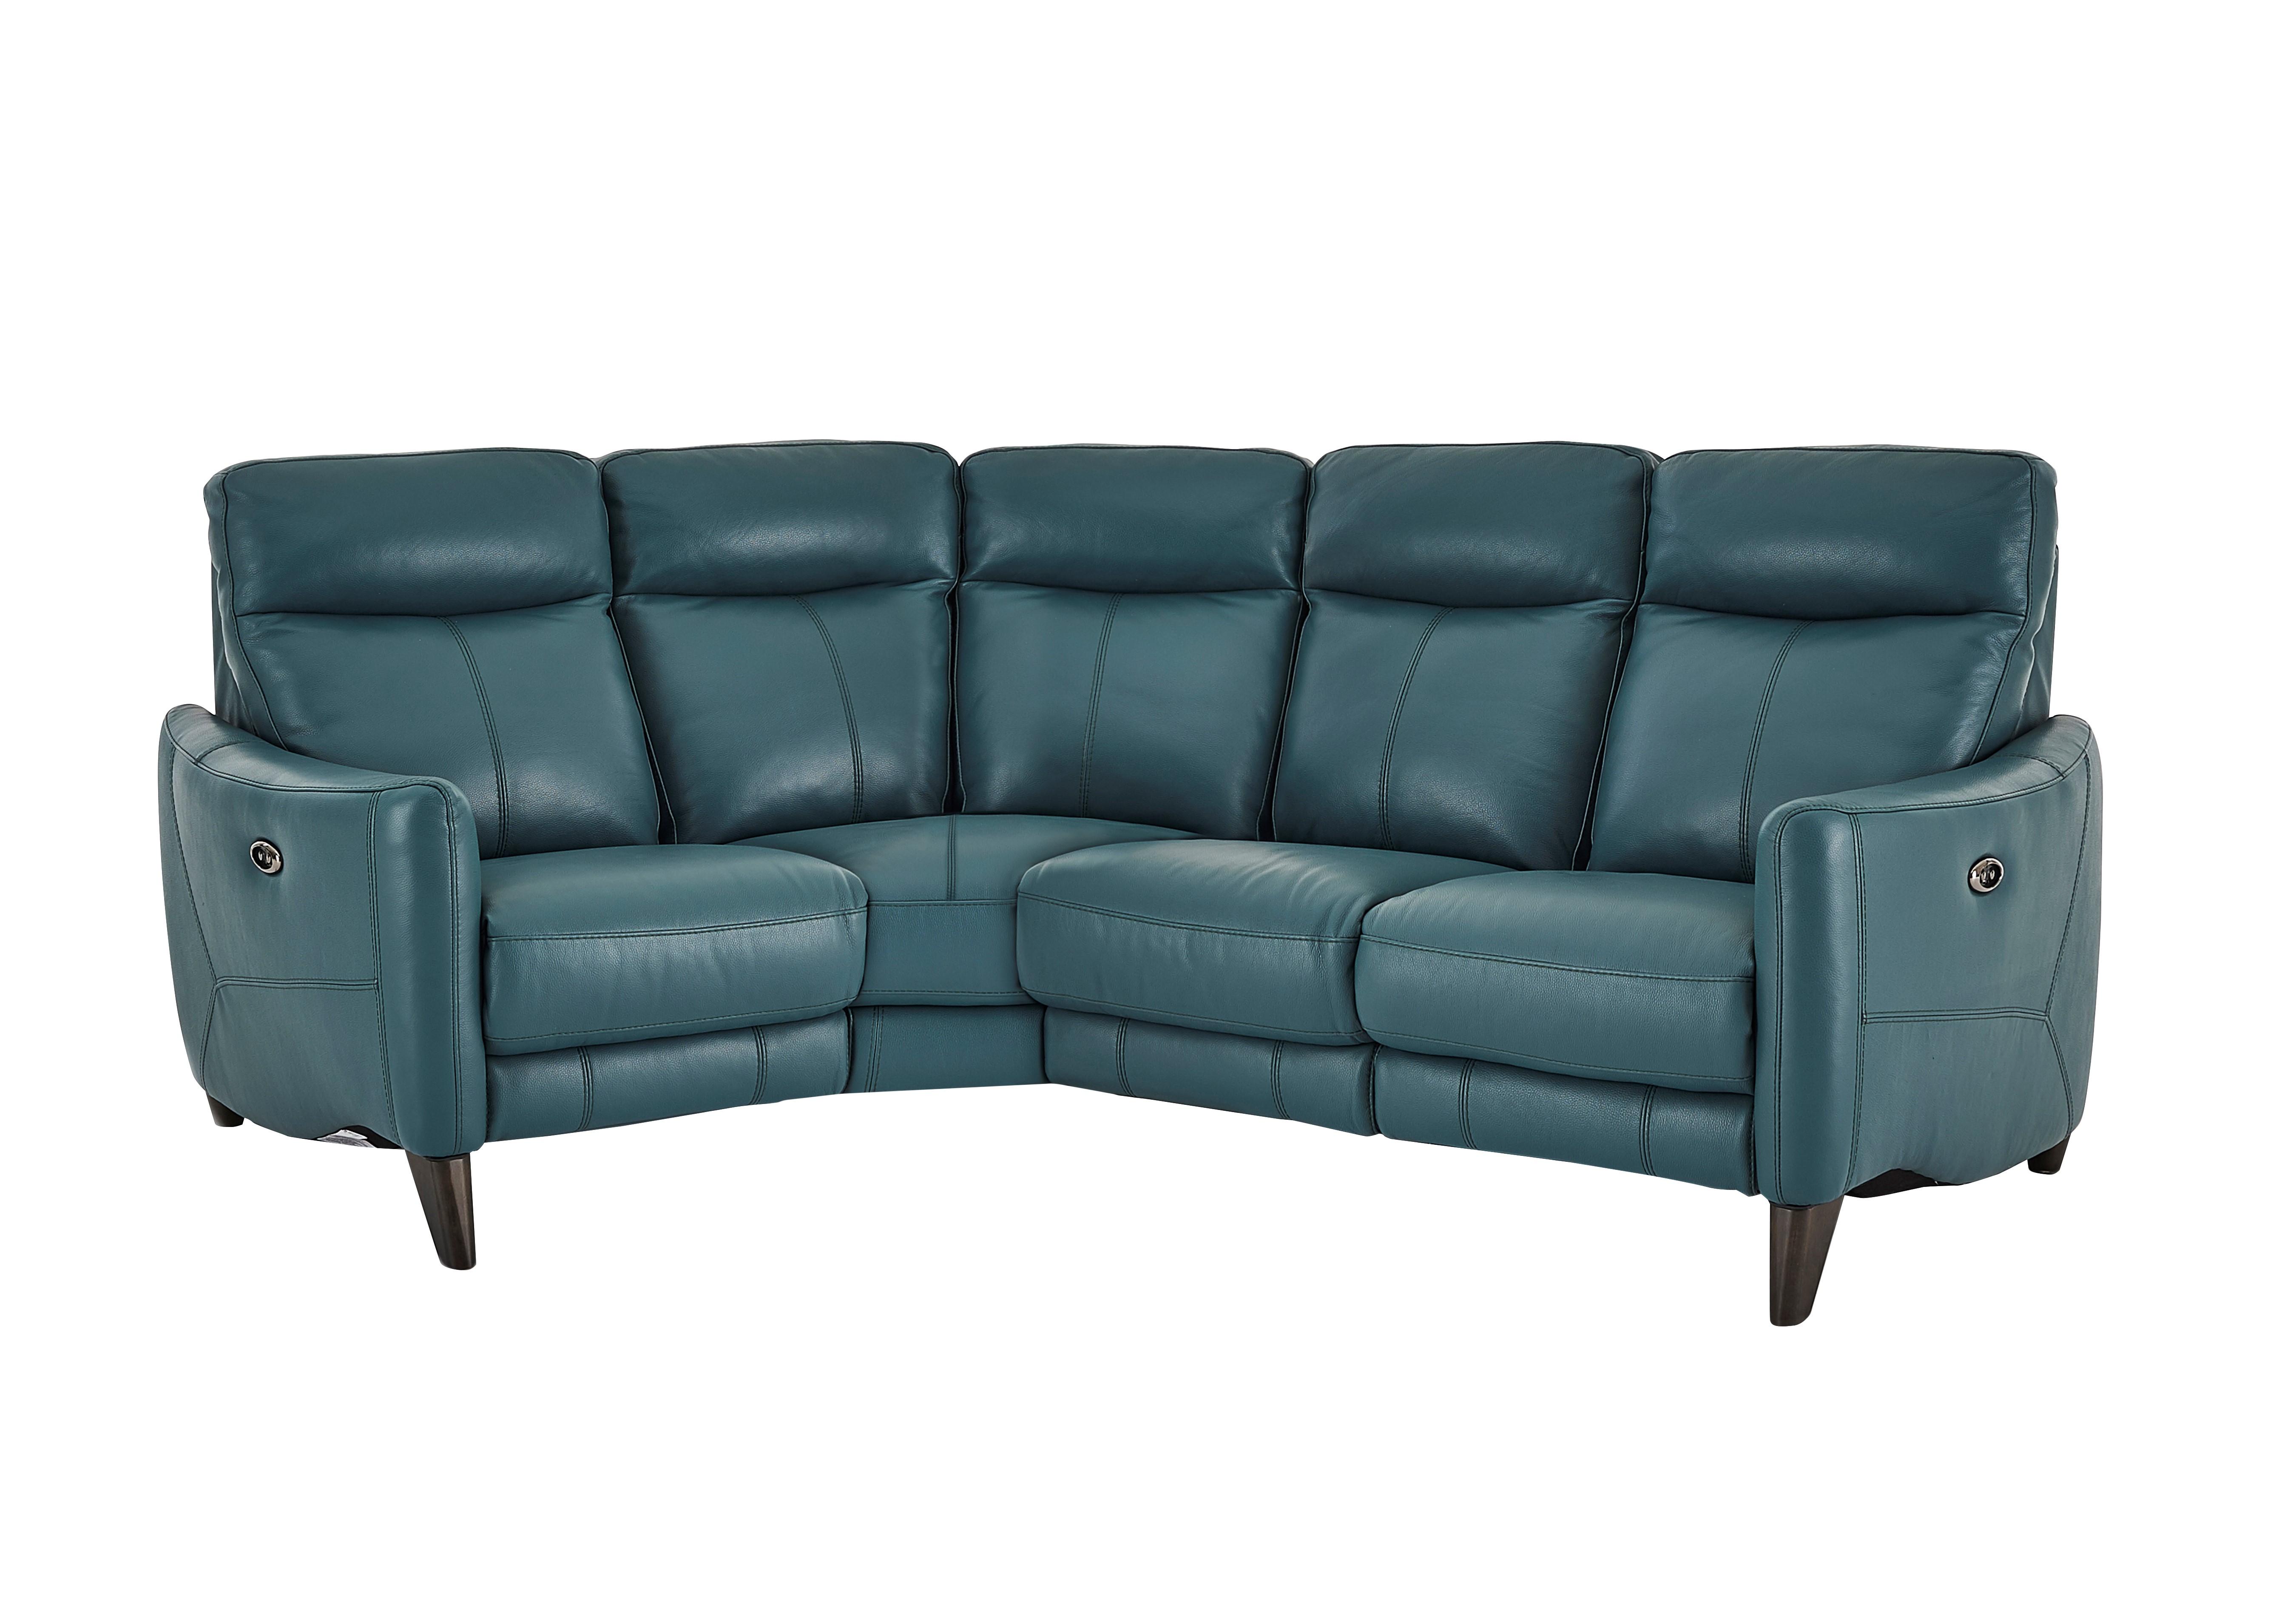 Compact Collection Petit Leather Corner Sofa in Bv-301e Lake Green on Furniture Village